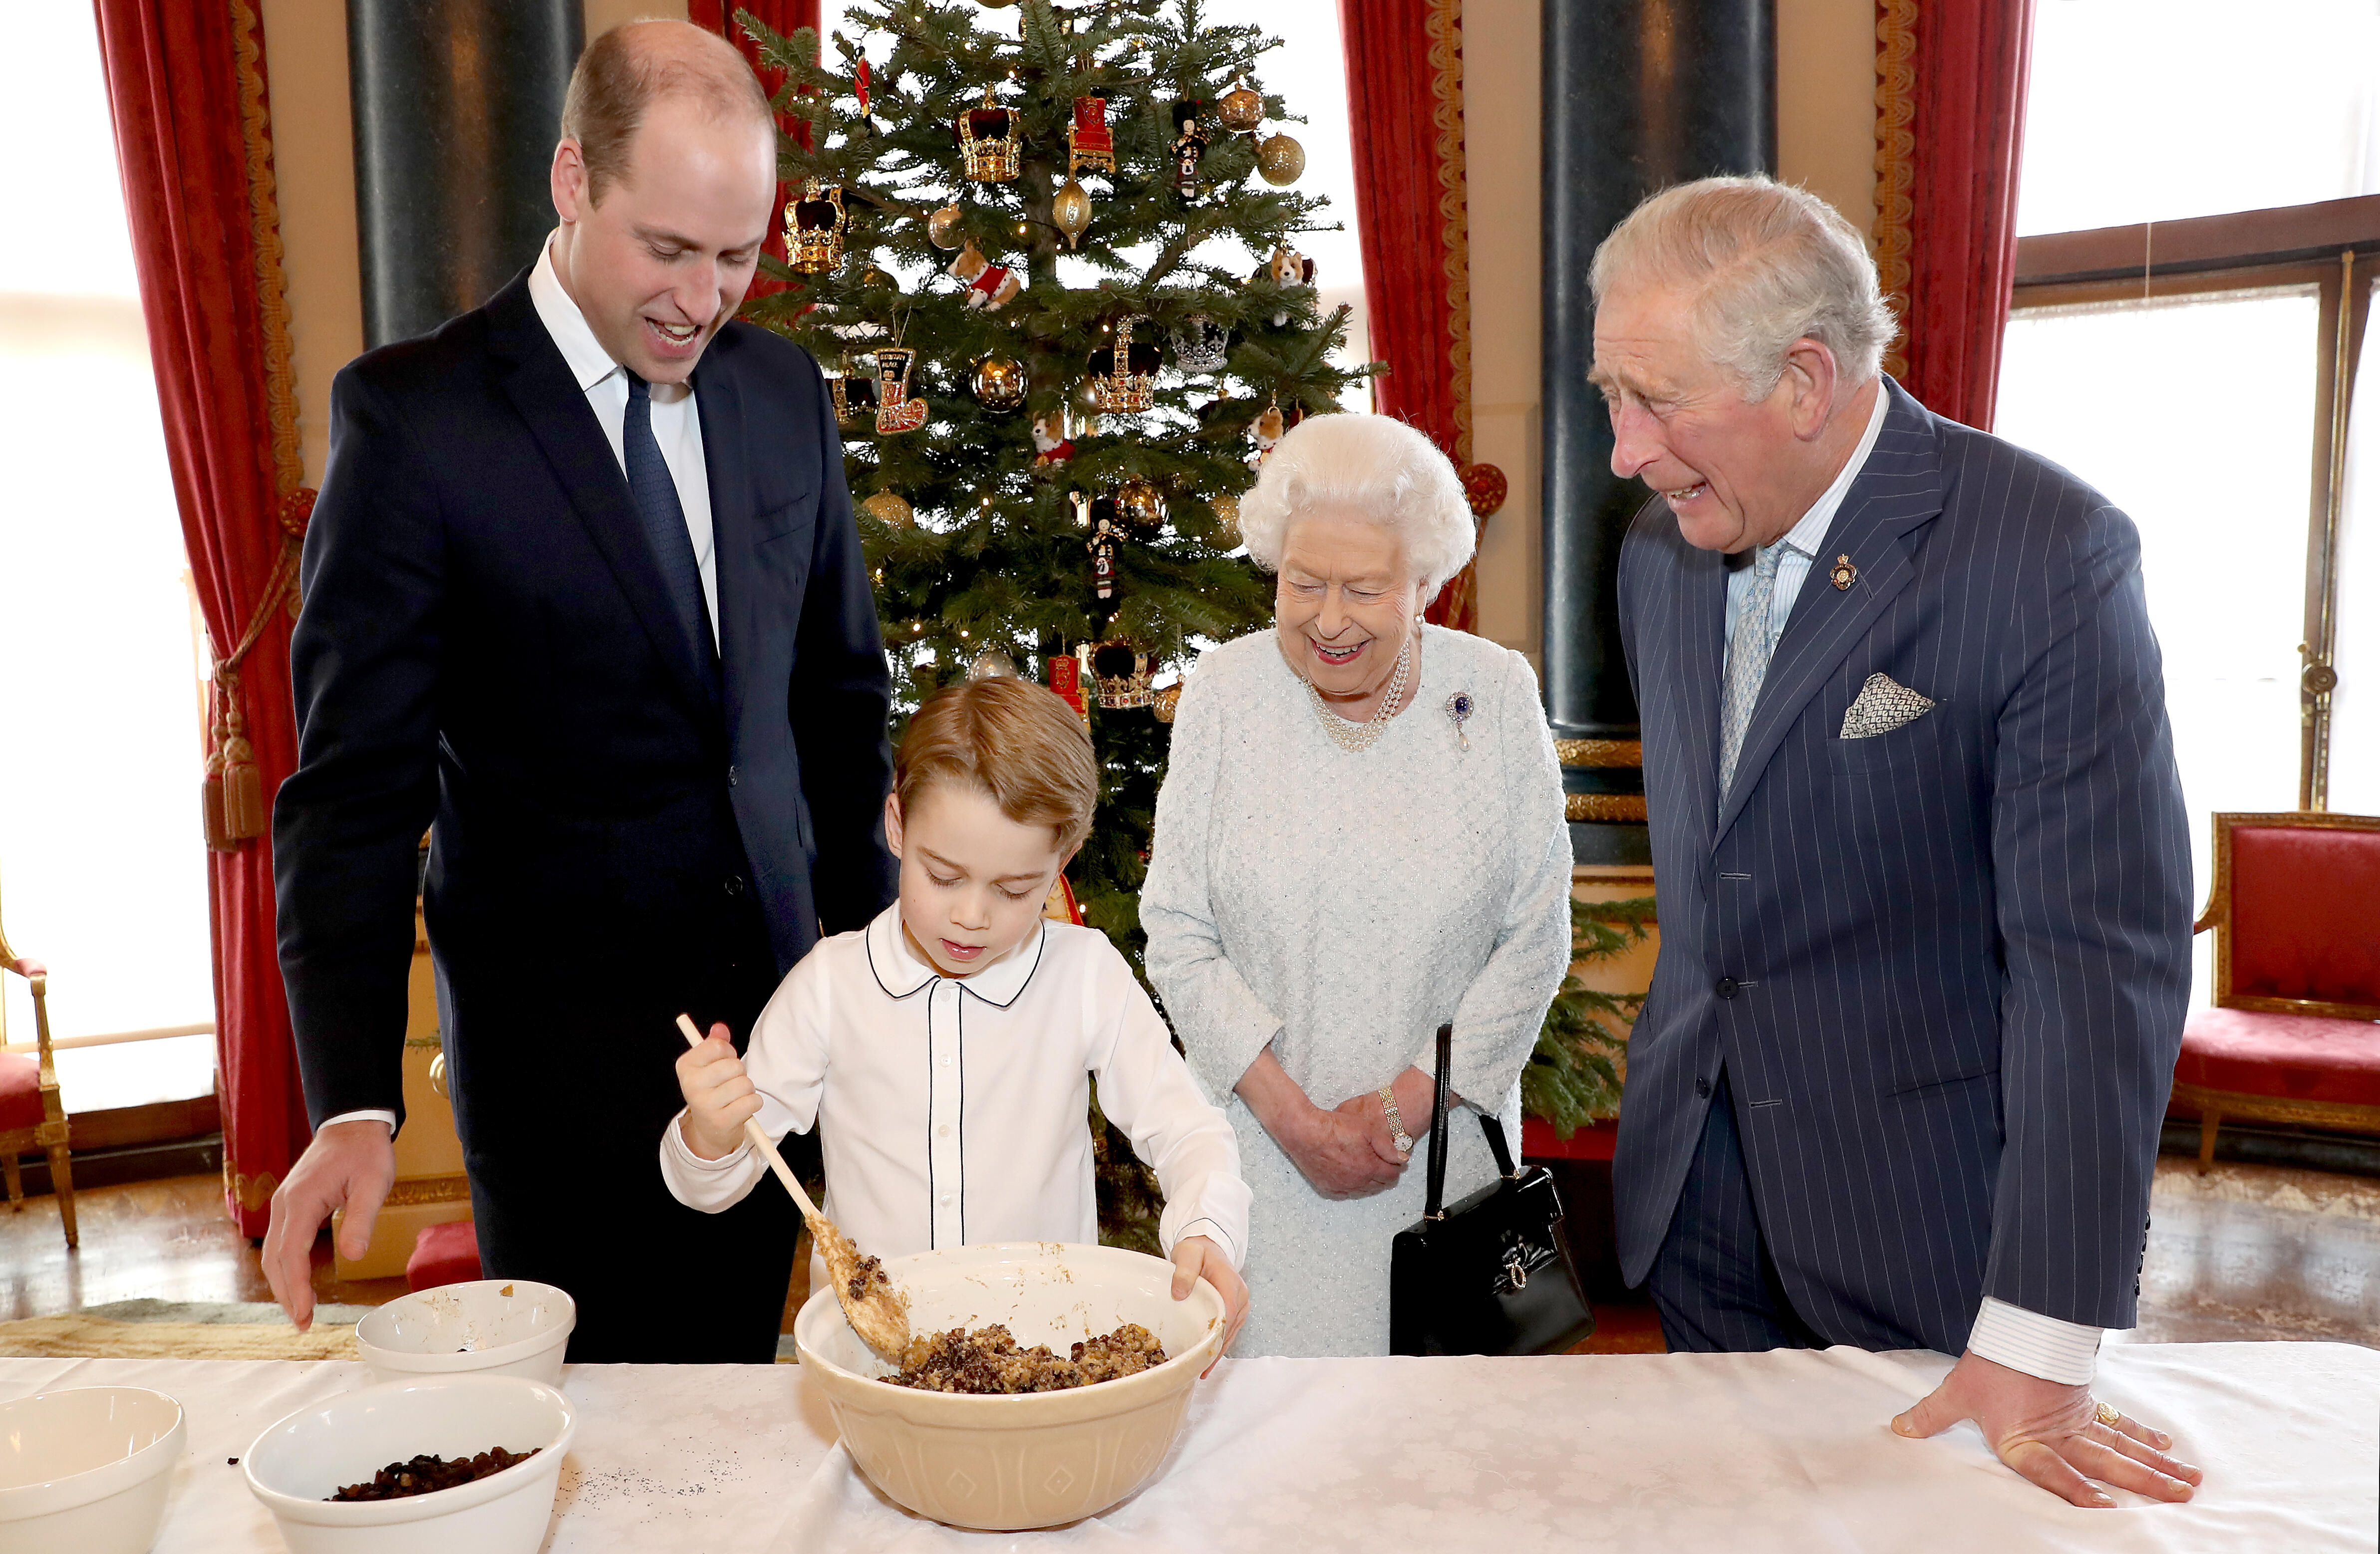 Prince Makes Christmas Pudding With Queen Elizabeth In New